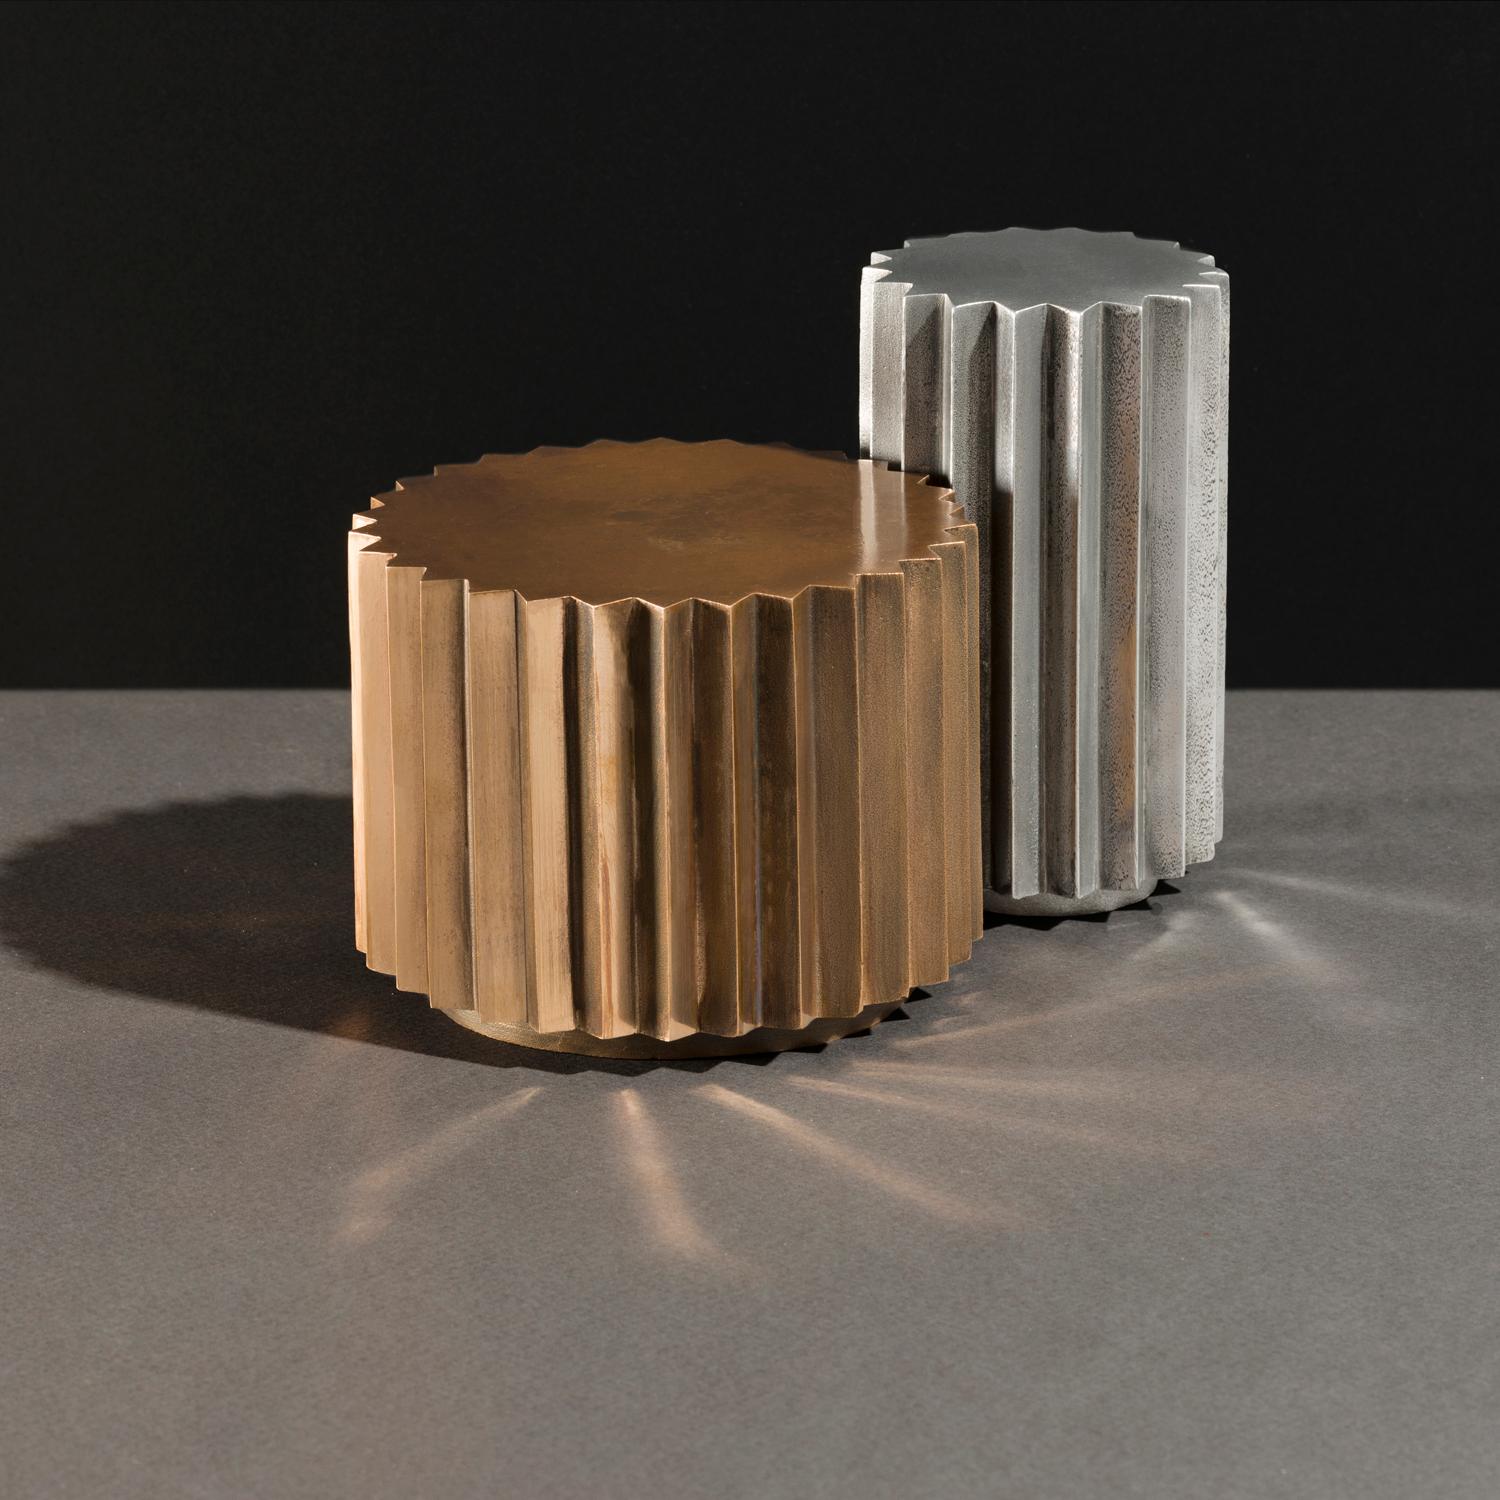 Set Of 2 Doris Tables by Fred and Juul
Dimensions: Coffee Table: Ø 60 x H 42 cm.
Side Table: Ø 36 x H 60 cm.
Materials: Bronze and aluminum.

Available in bronze and aluminum. Also available in different measurements. Custom sizes, materials or